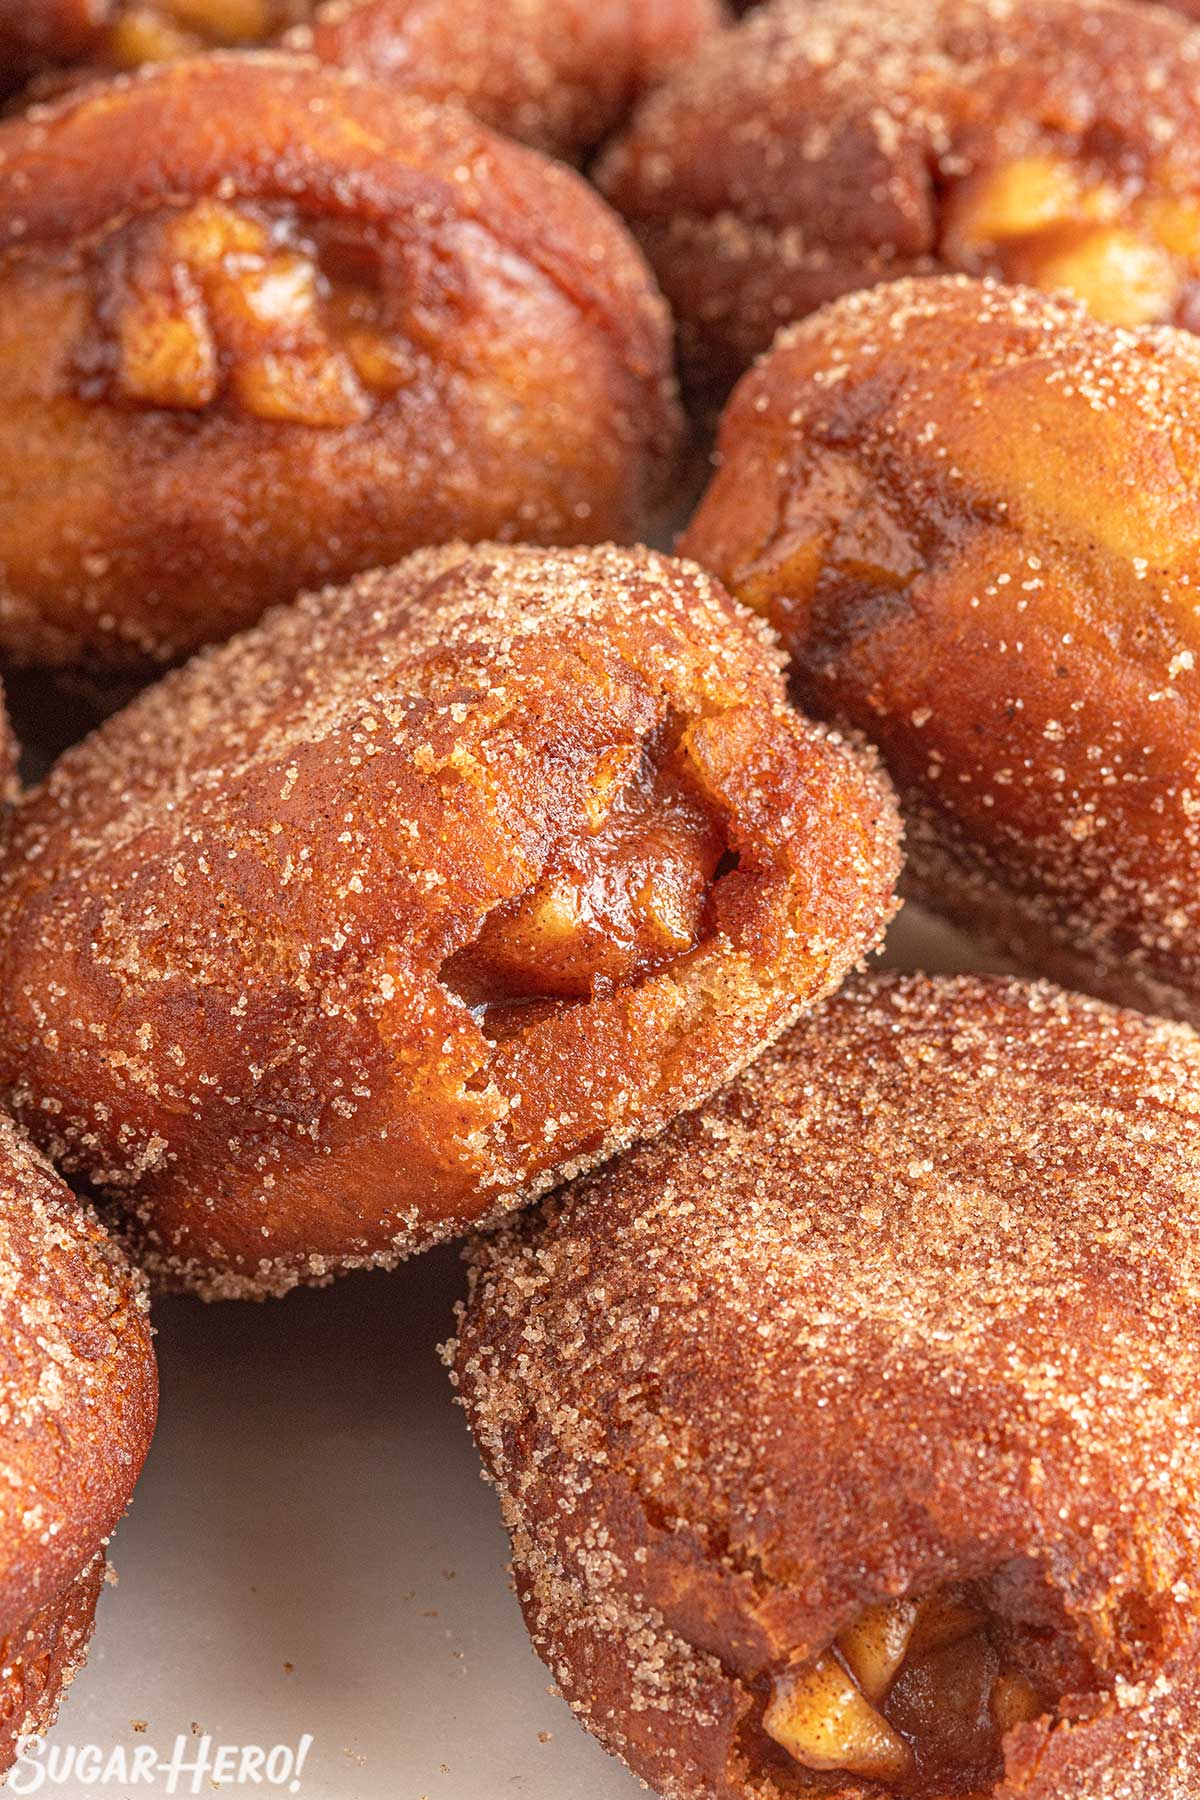 Close-up of a group of Apple Donuts rolled in cinnamon sugar.